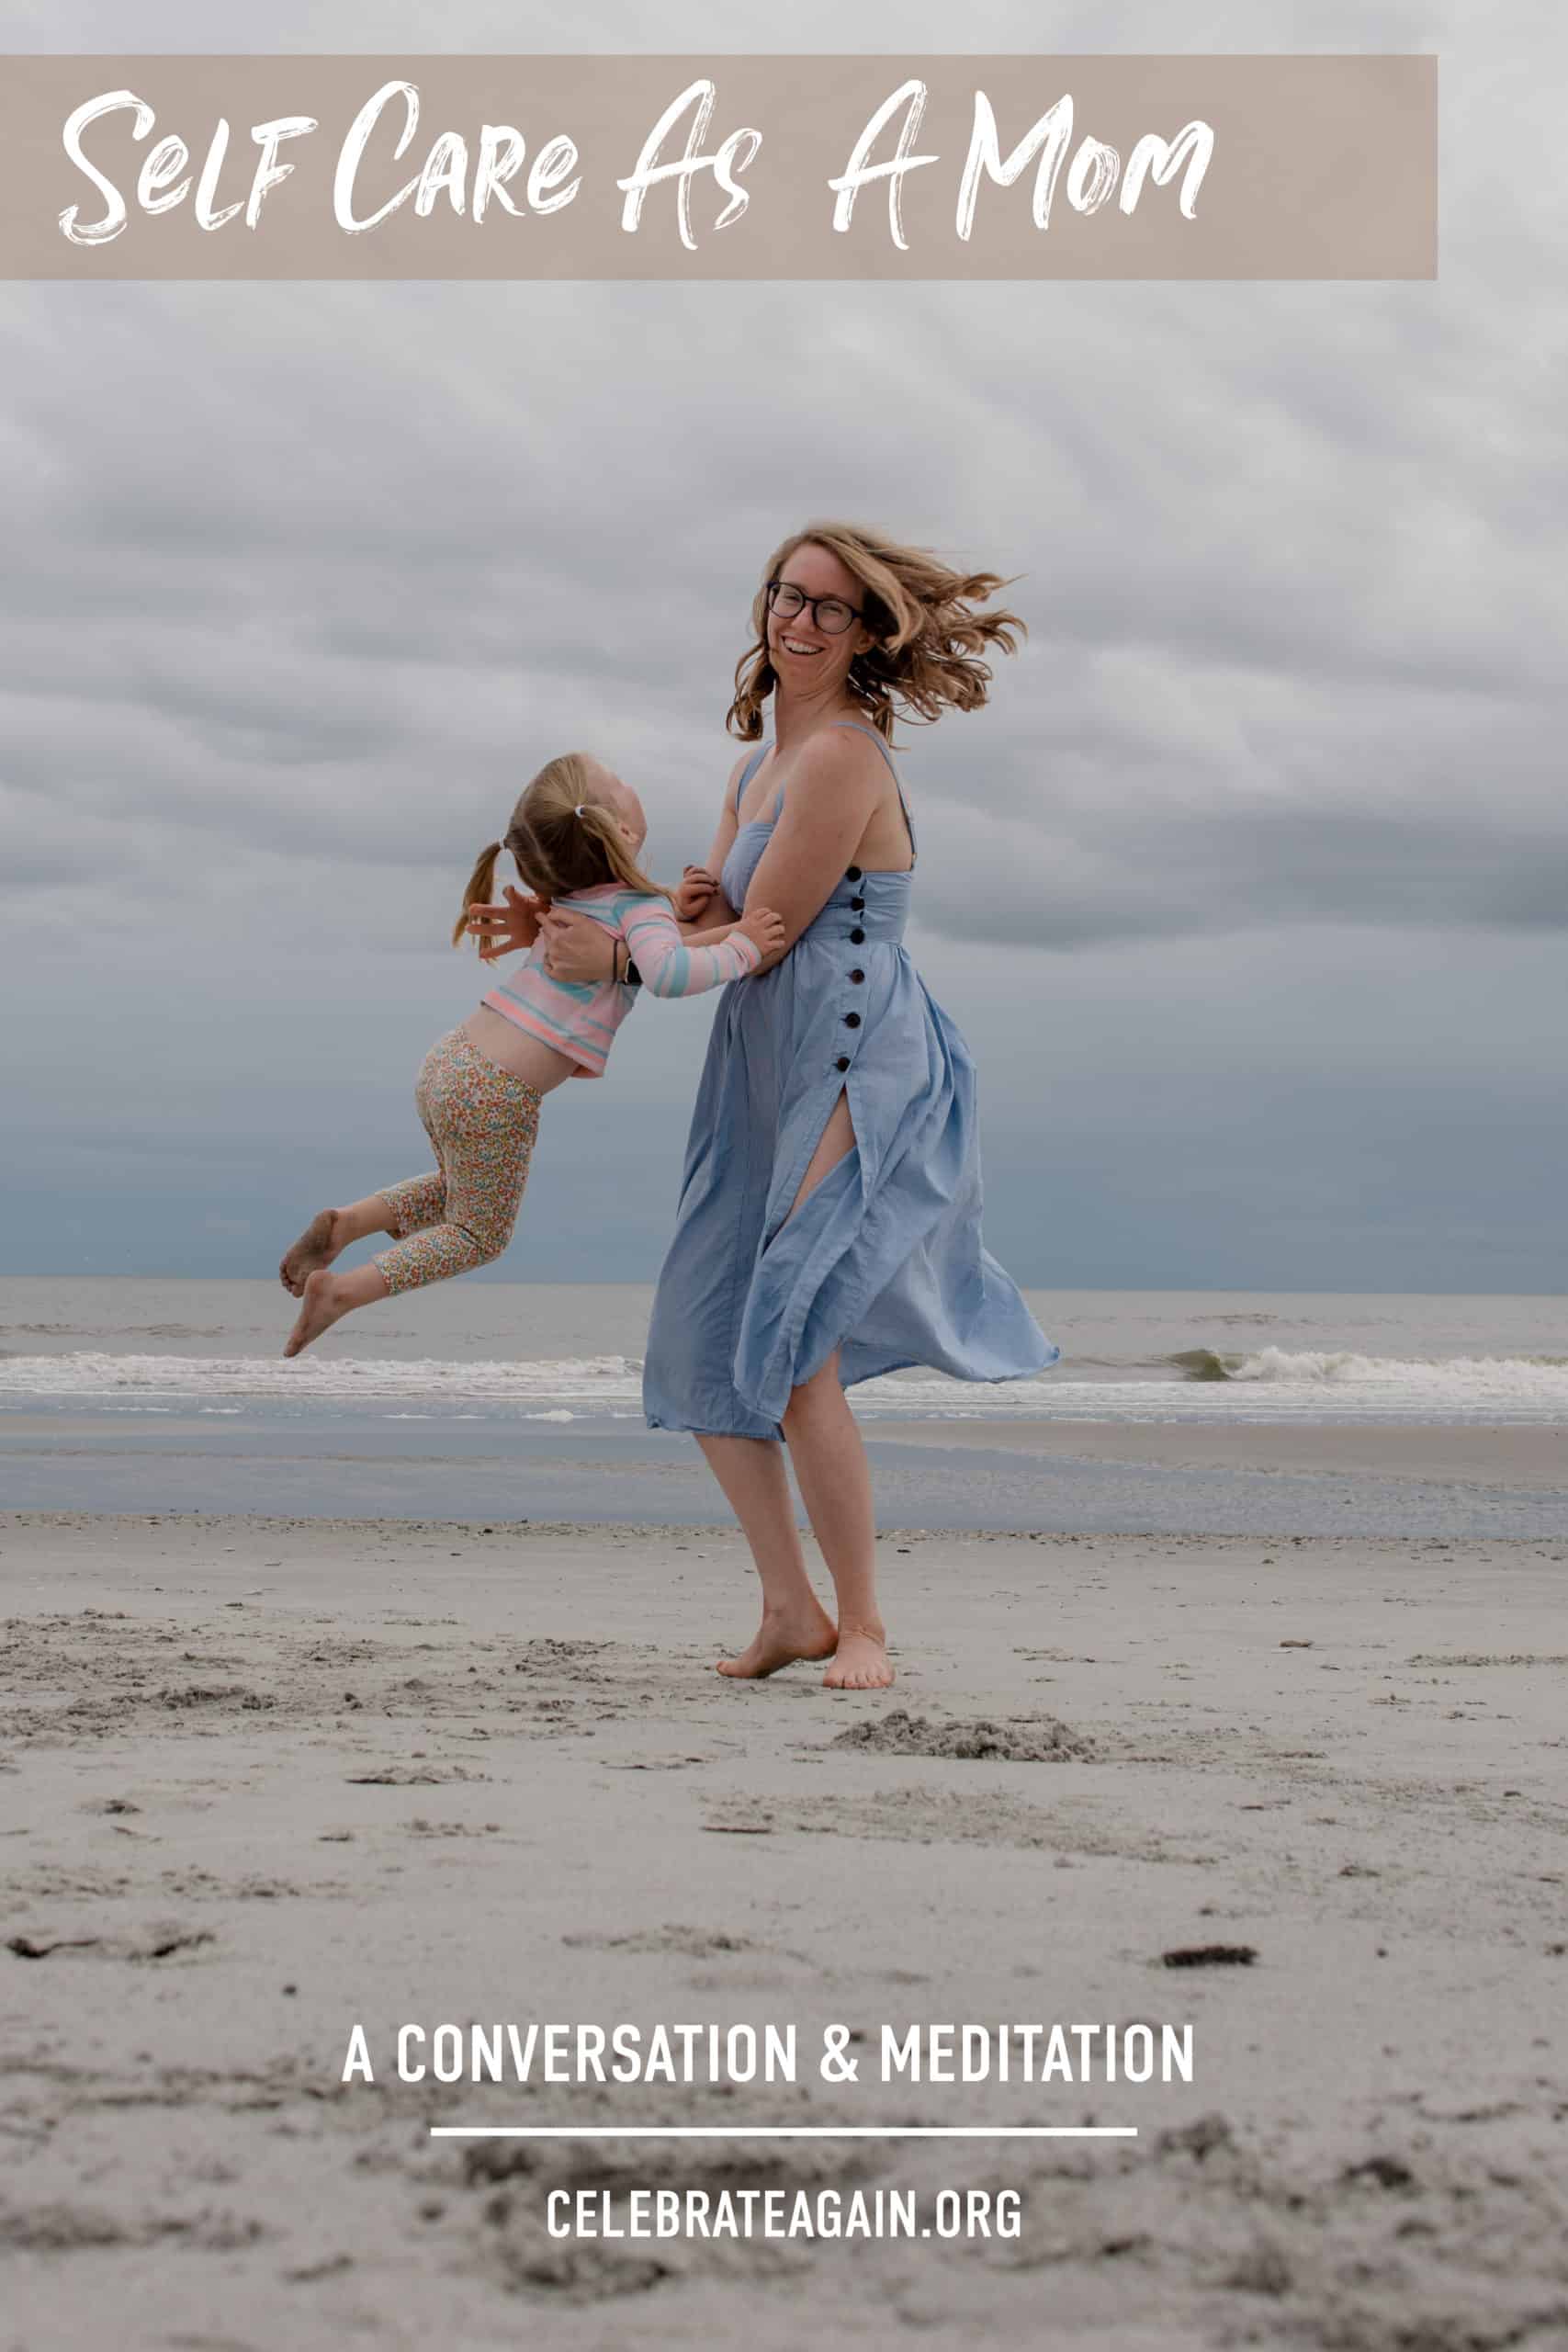 "Self care as a mom" a mom spinning her child by the beach